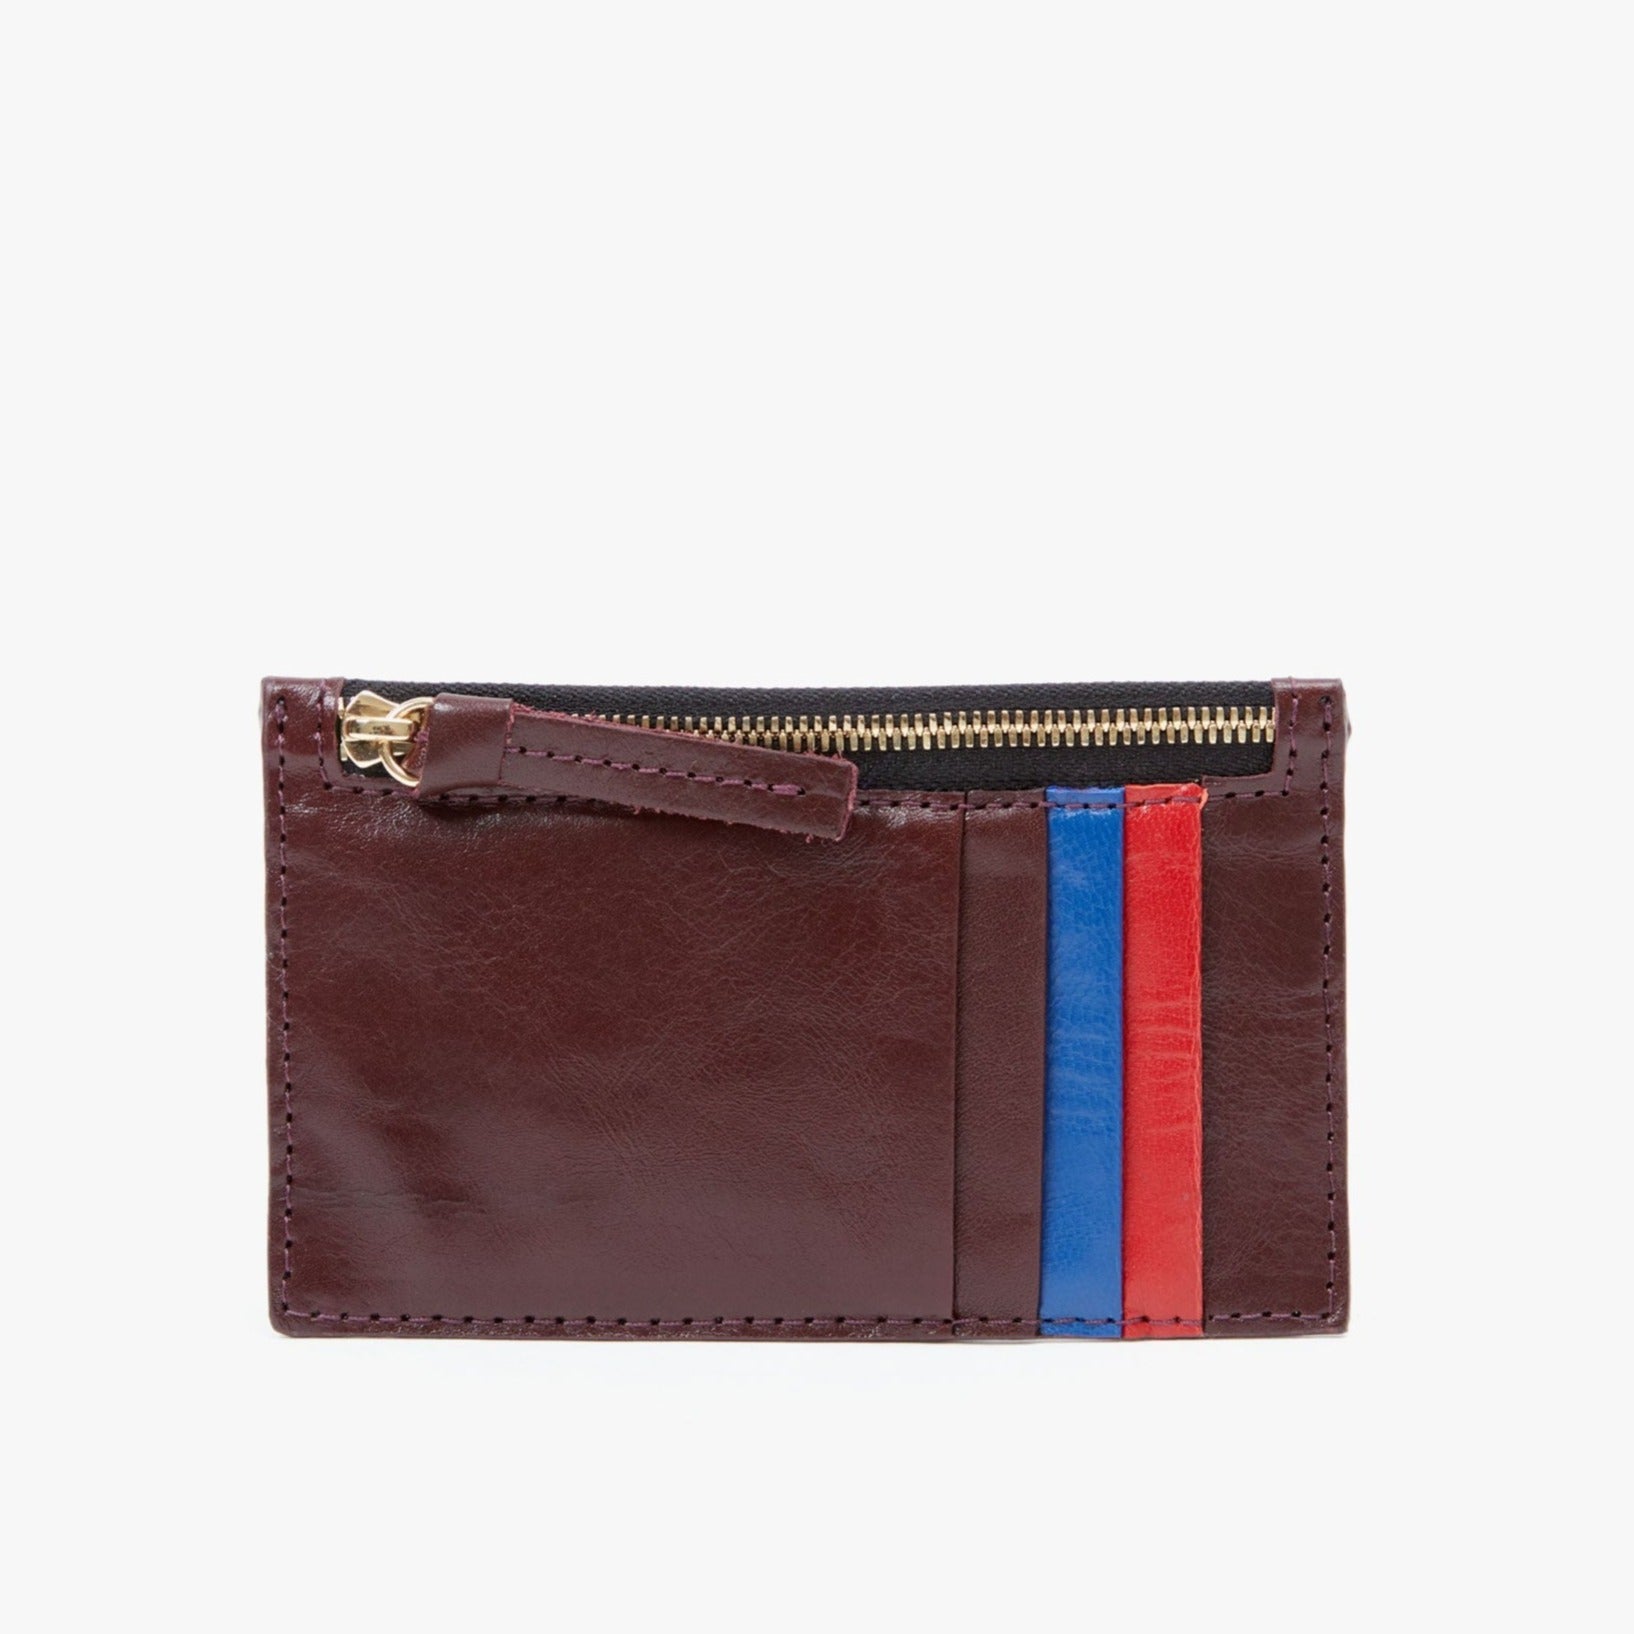 Clare V, Bags, Clare V Petite Zip Wallet New